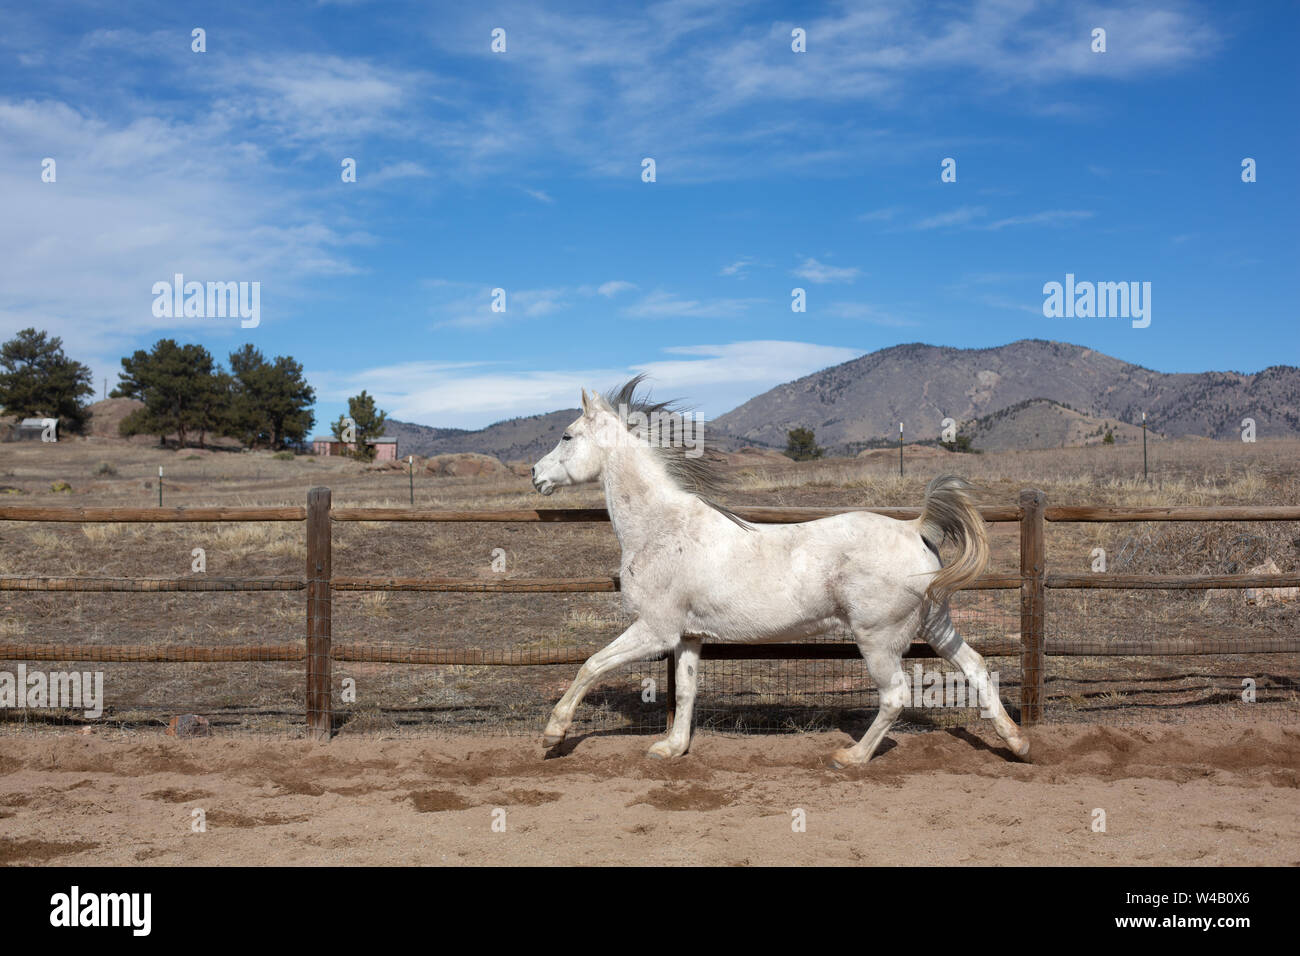 Arabian horse running in a round pen with blue sky Stock Photo